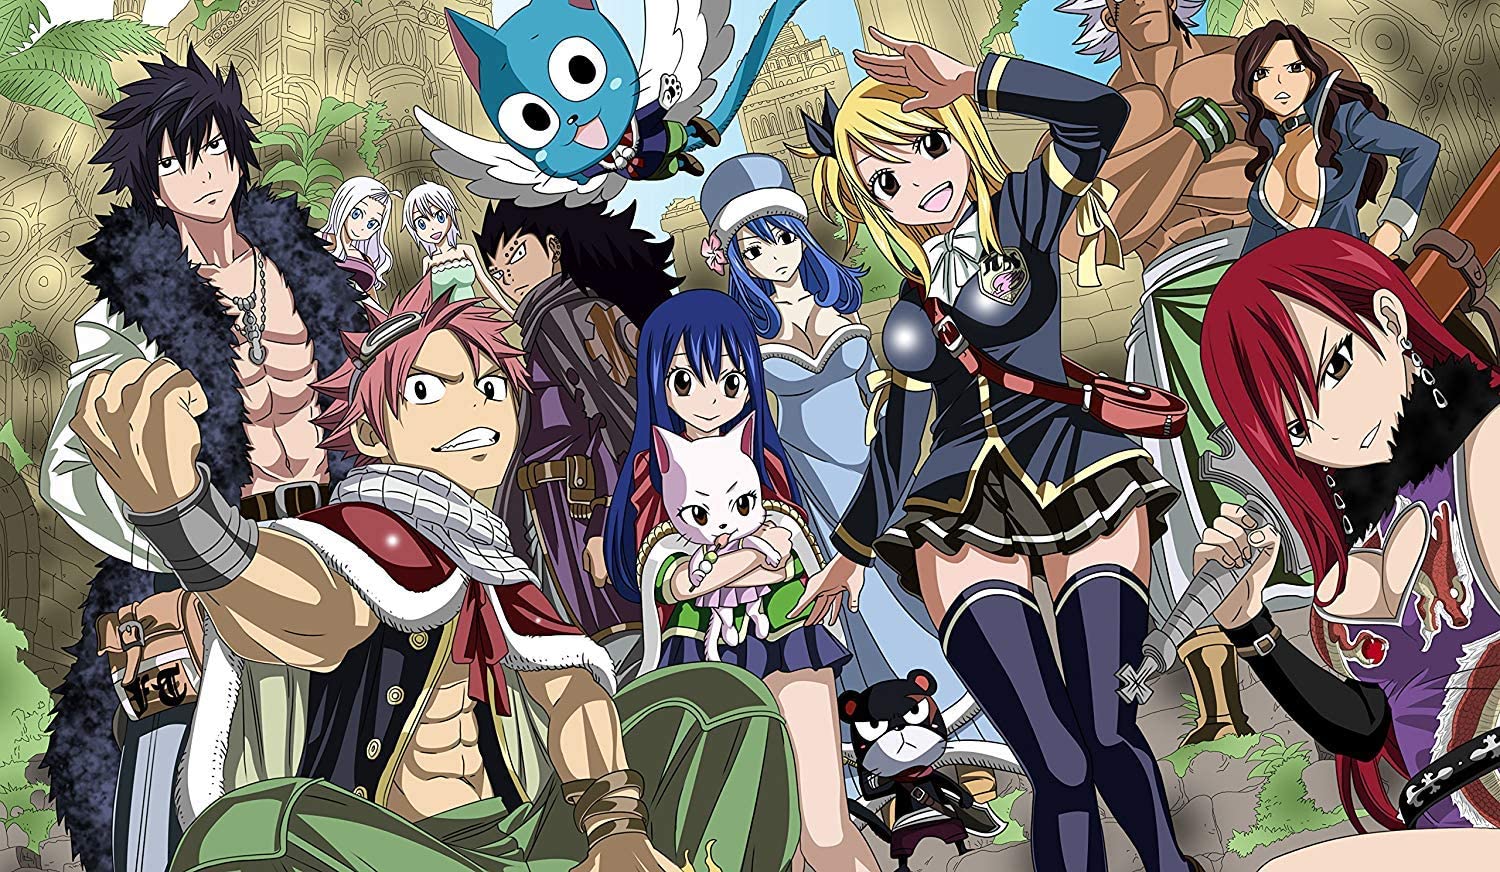 Fairy Tail - MMO Square